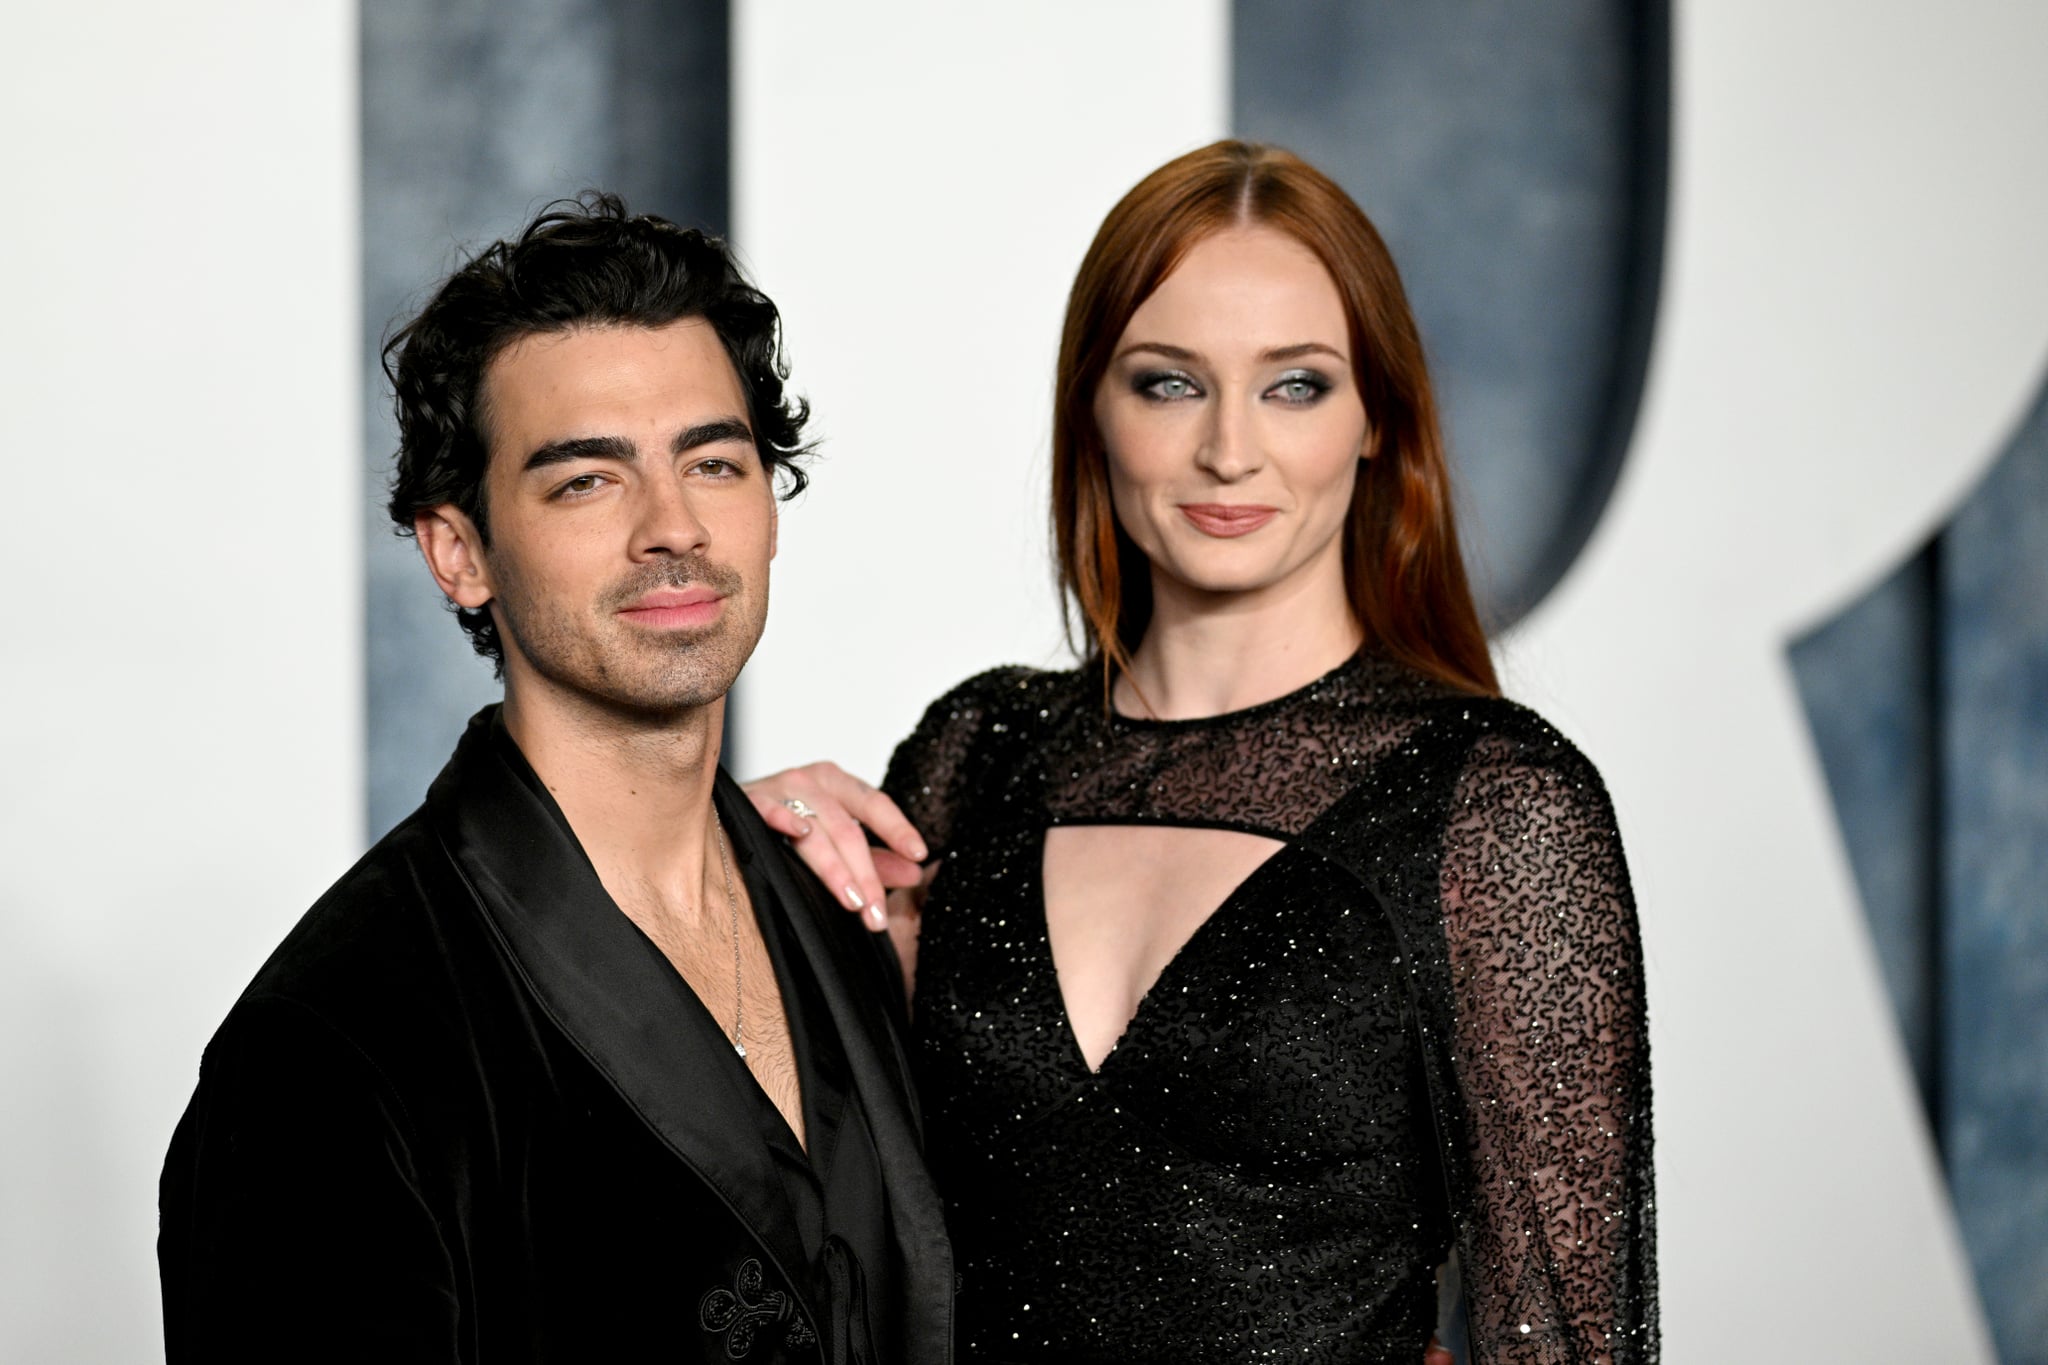 BEVERLY HILLS, CALIFORNIA - MARCH 12: Joe Jonas, Sophie Turner attend the 2023 Vanity Fair Oscar Party Hosted By Radhika Jones at Wallis Annenberg Centre for the Performing Arts on March 12, 2023 in Beverly Hills, California. (Photo by Lionel Hahn/Getty Images)